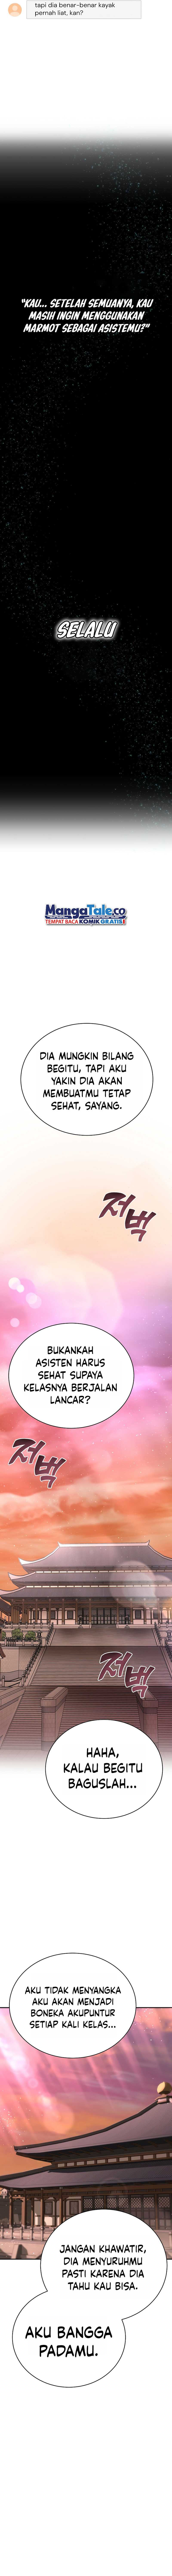 Martial Streamer Chapter 33